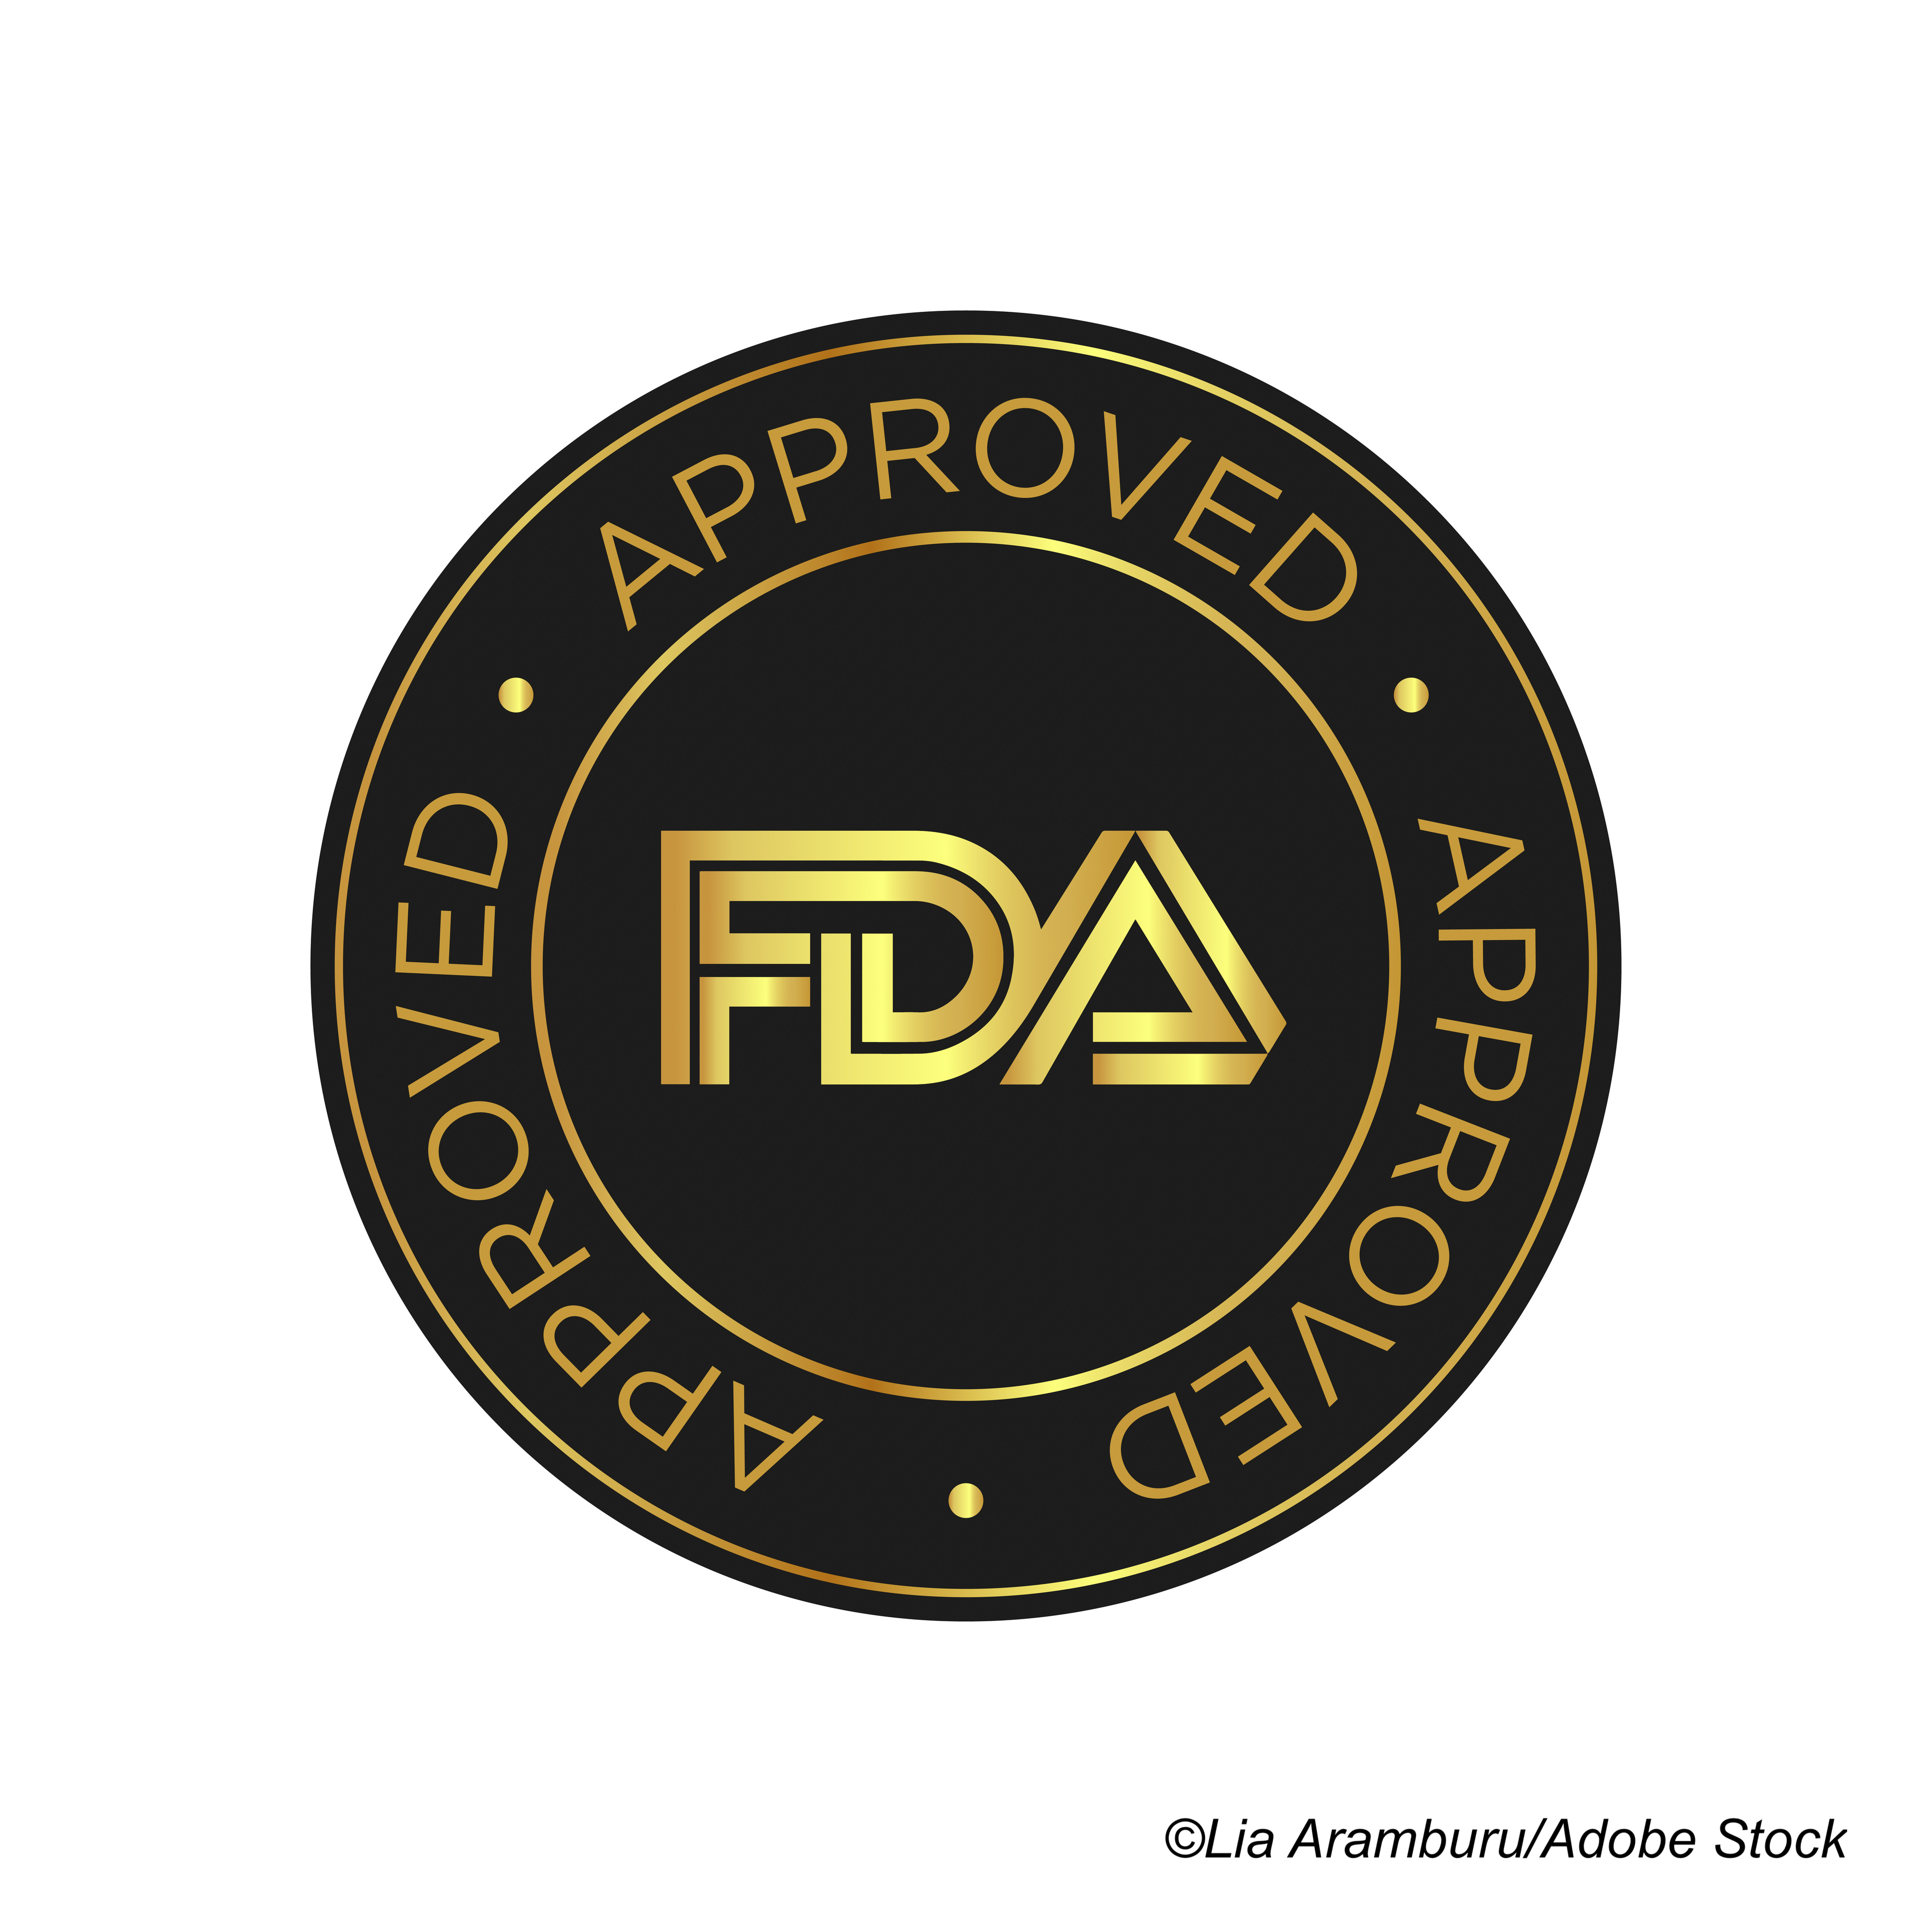 FDA Approves CAR T-Cell Tx for Relapsed/Refractory B-Cell ALL